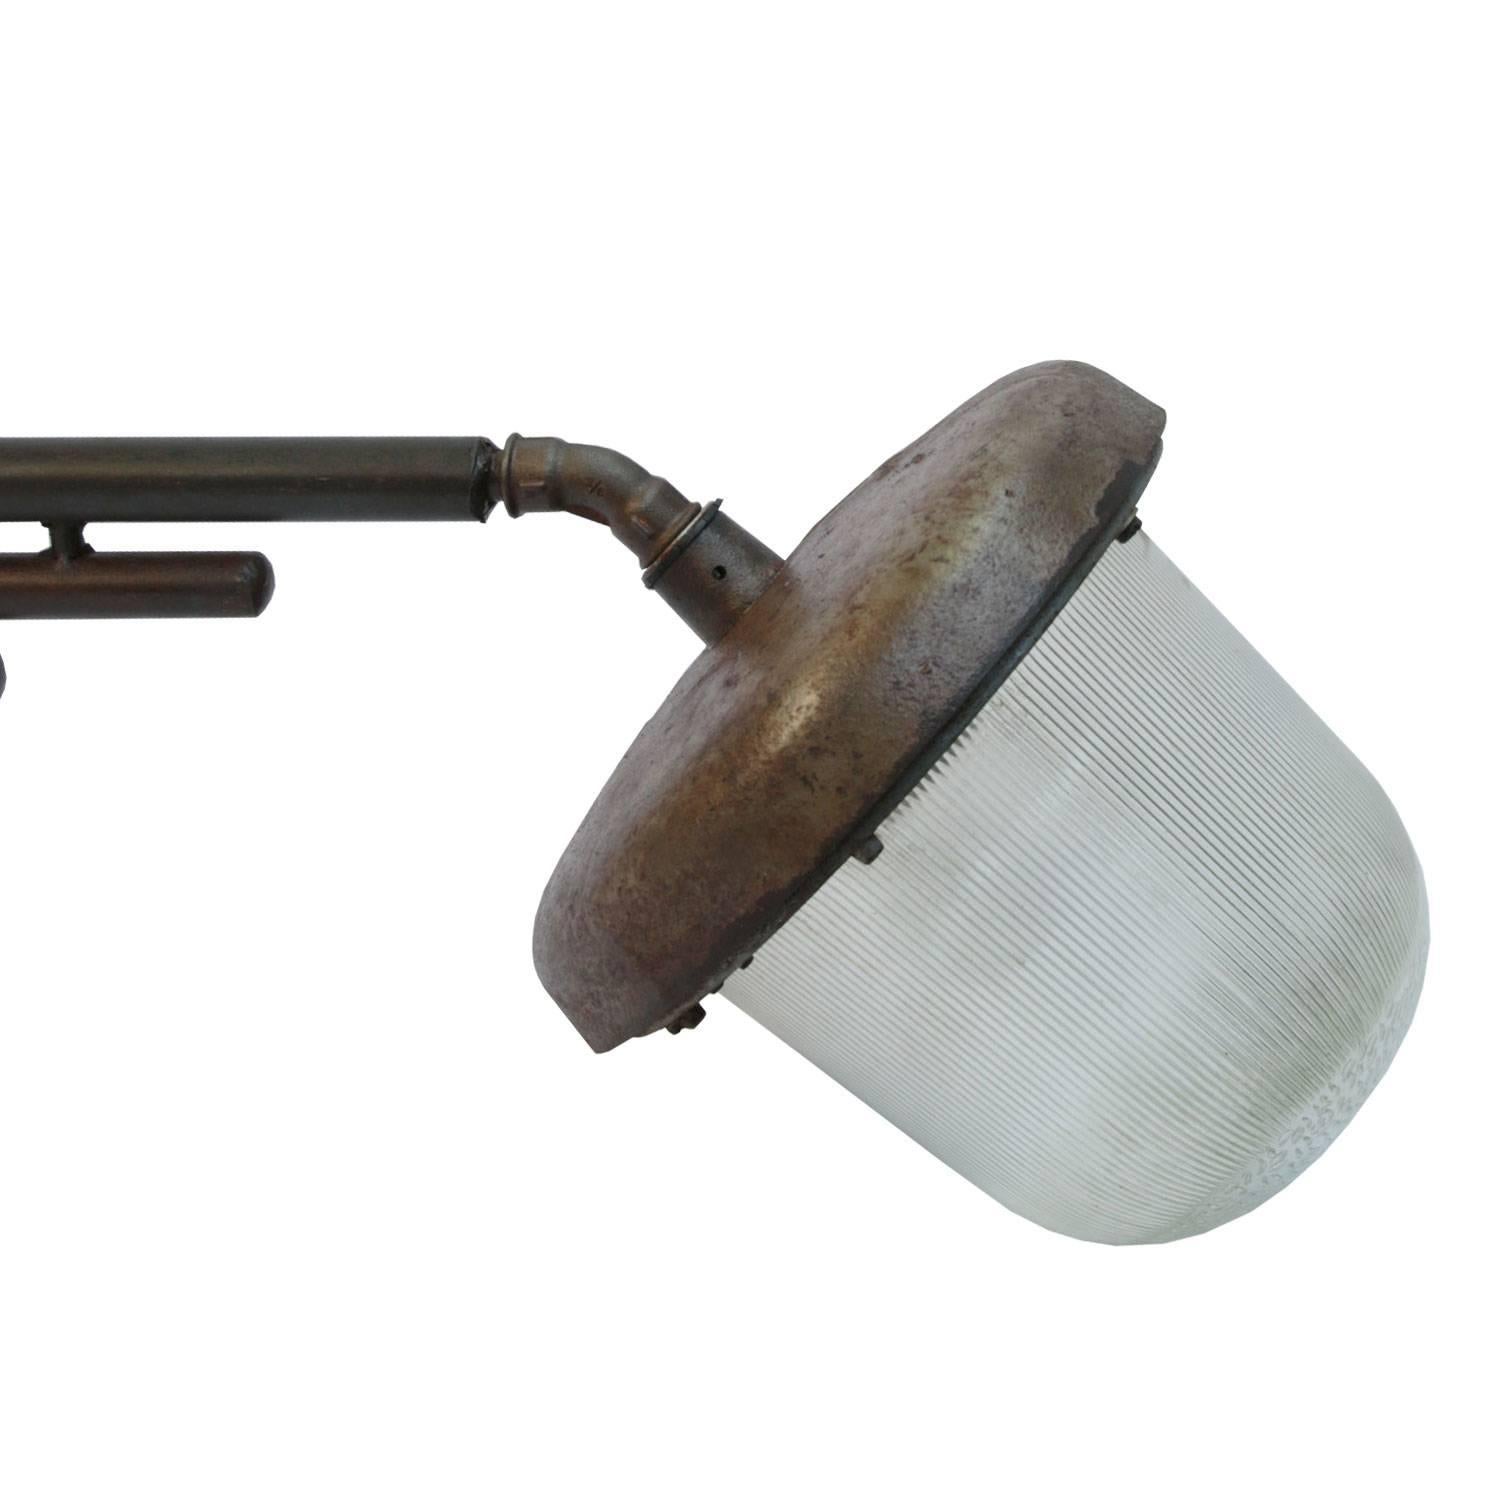 Large Industrial wall light. Cast iron arm with Holophane glass.
Size wall mount: width 8 cm. Height 19 cm. 2 holes to secure.
Max. Shipped in two parts.

Weight: 10.0 kg / 22 lb

All lamps have been made suitable by international standards for